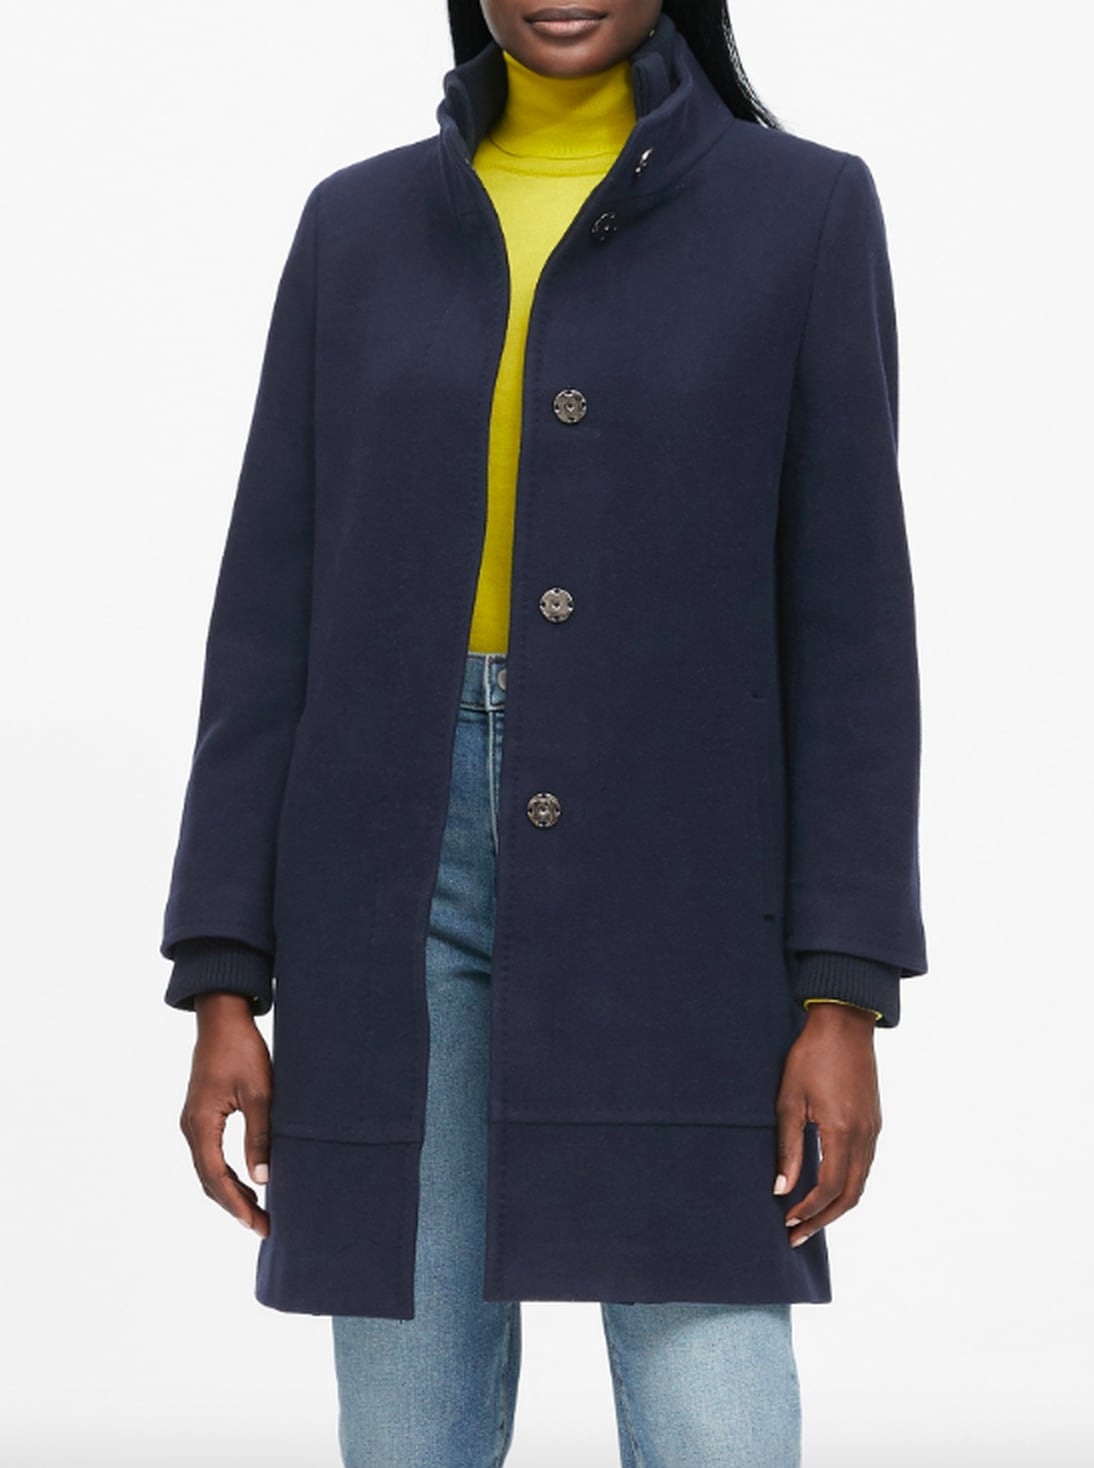 Best Coats and Jackets For Women on Sale at Banana Republic | POPSUGAR ...